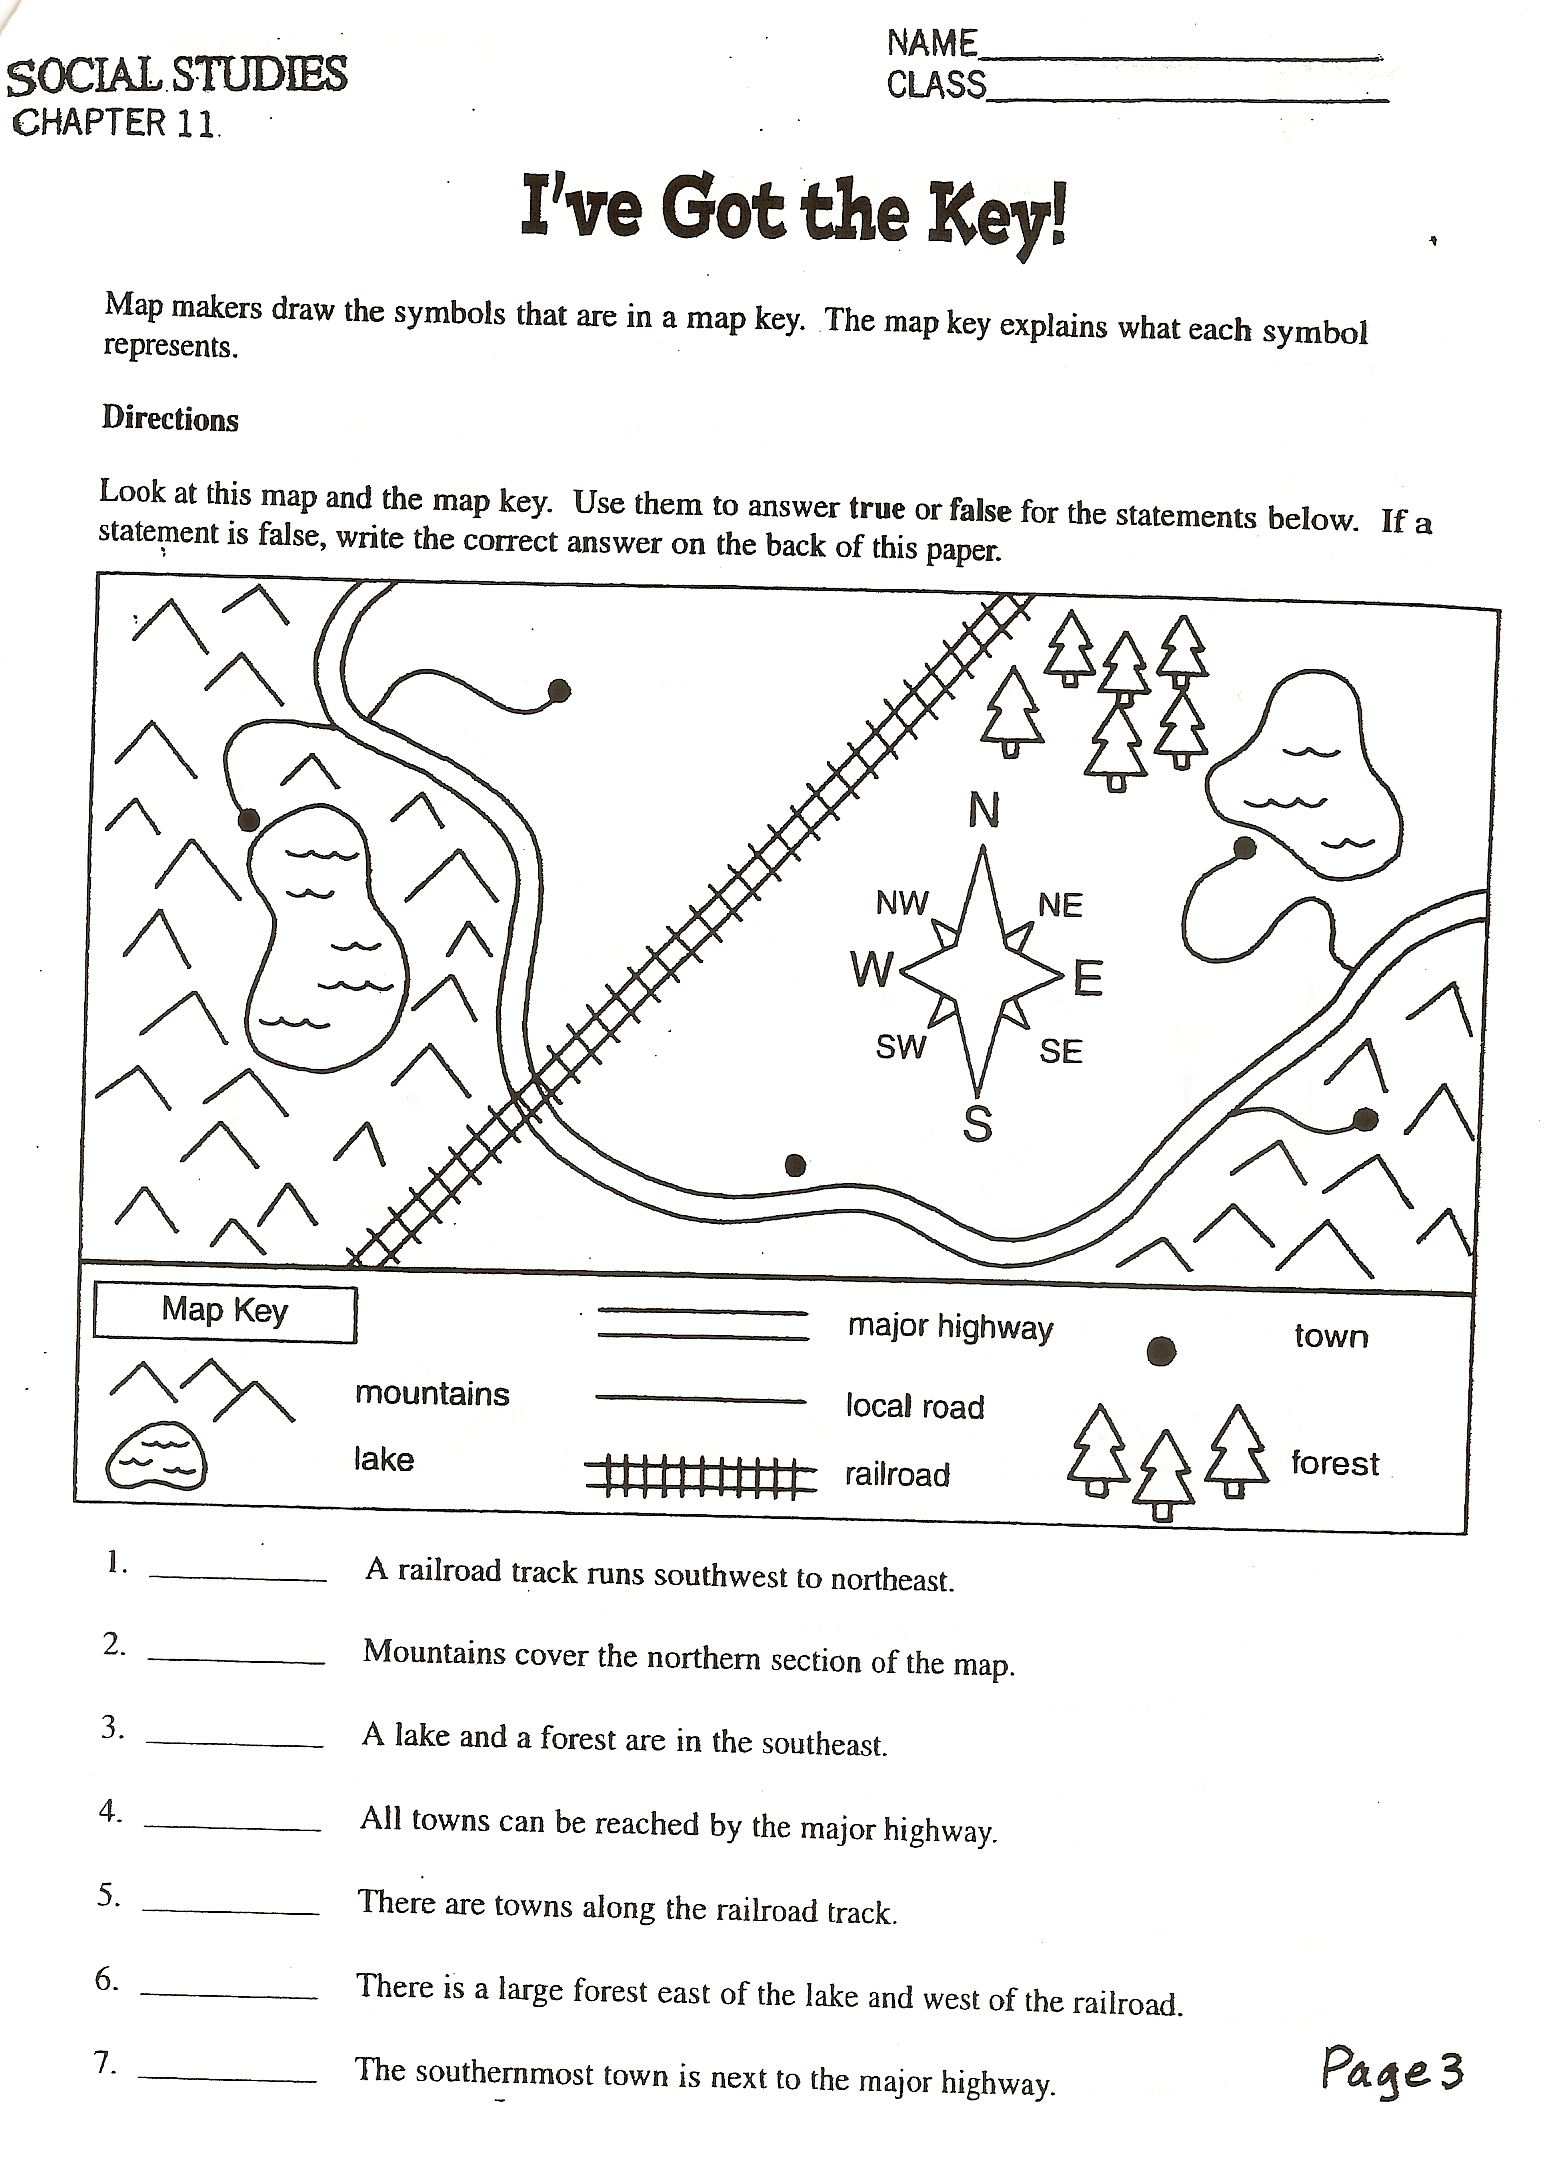 Social Studies Skills With Images Worksheets Free Map